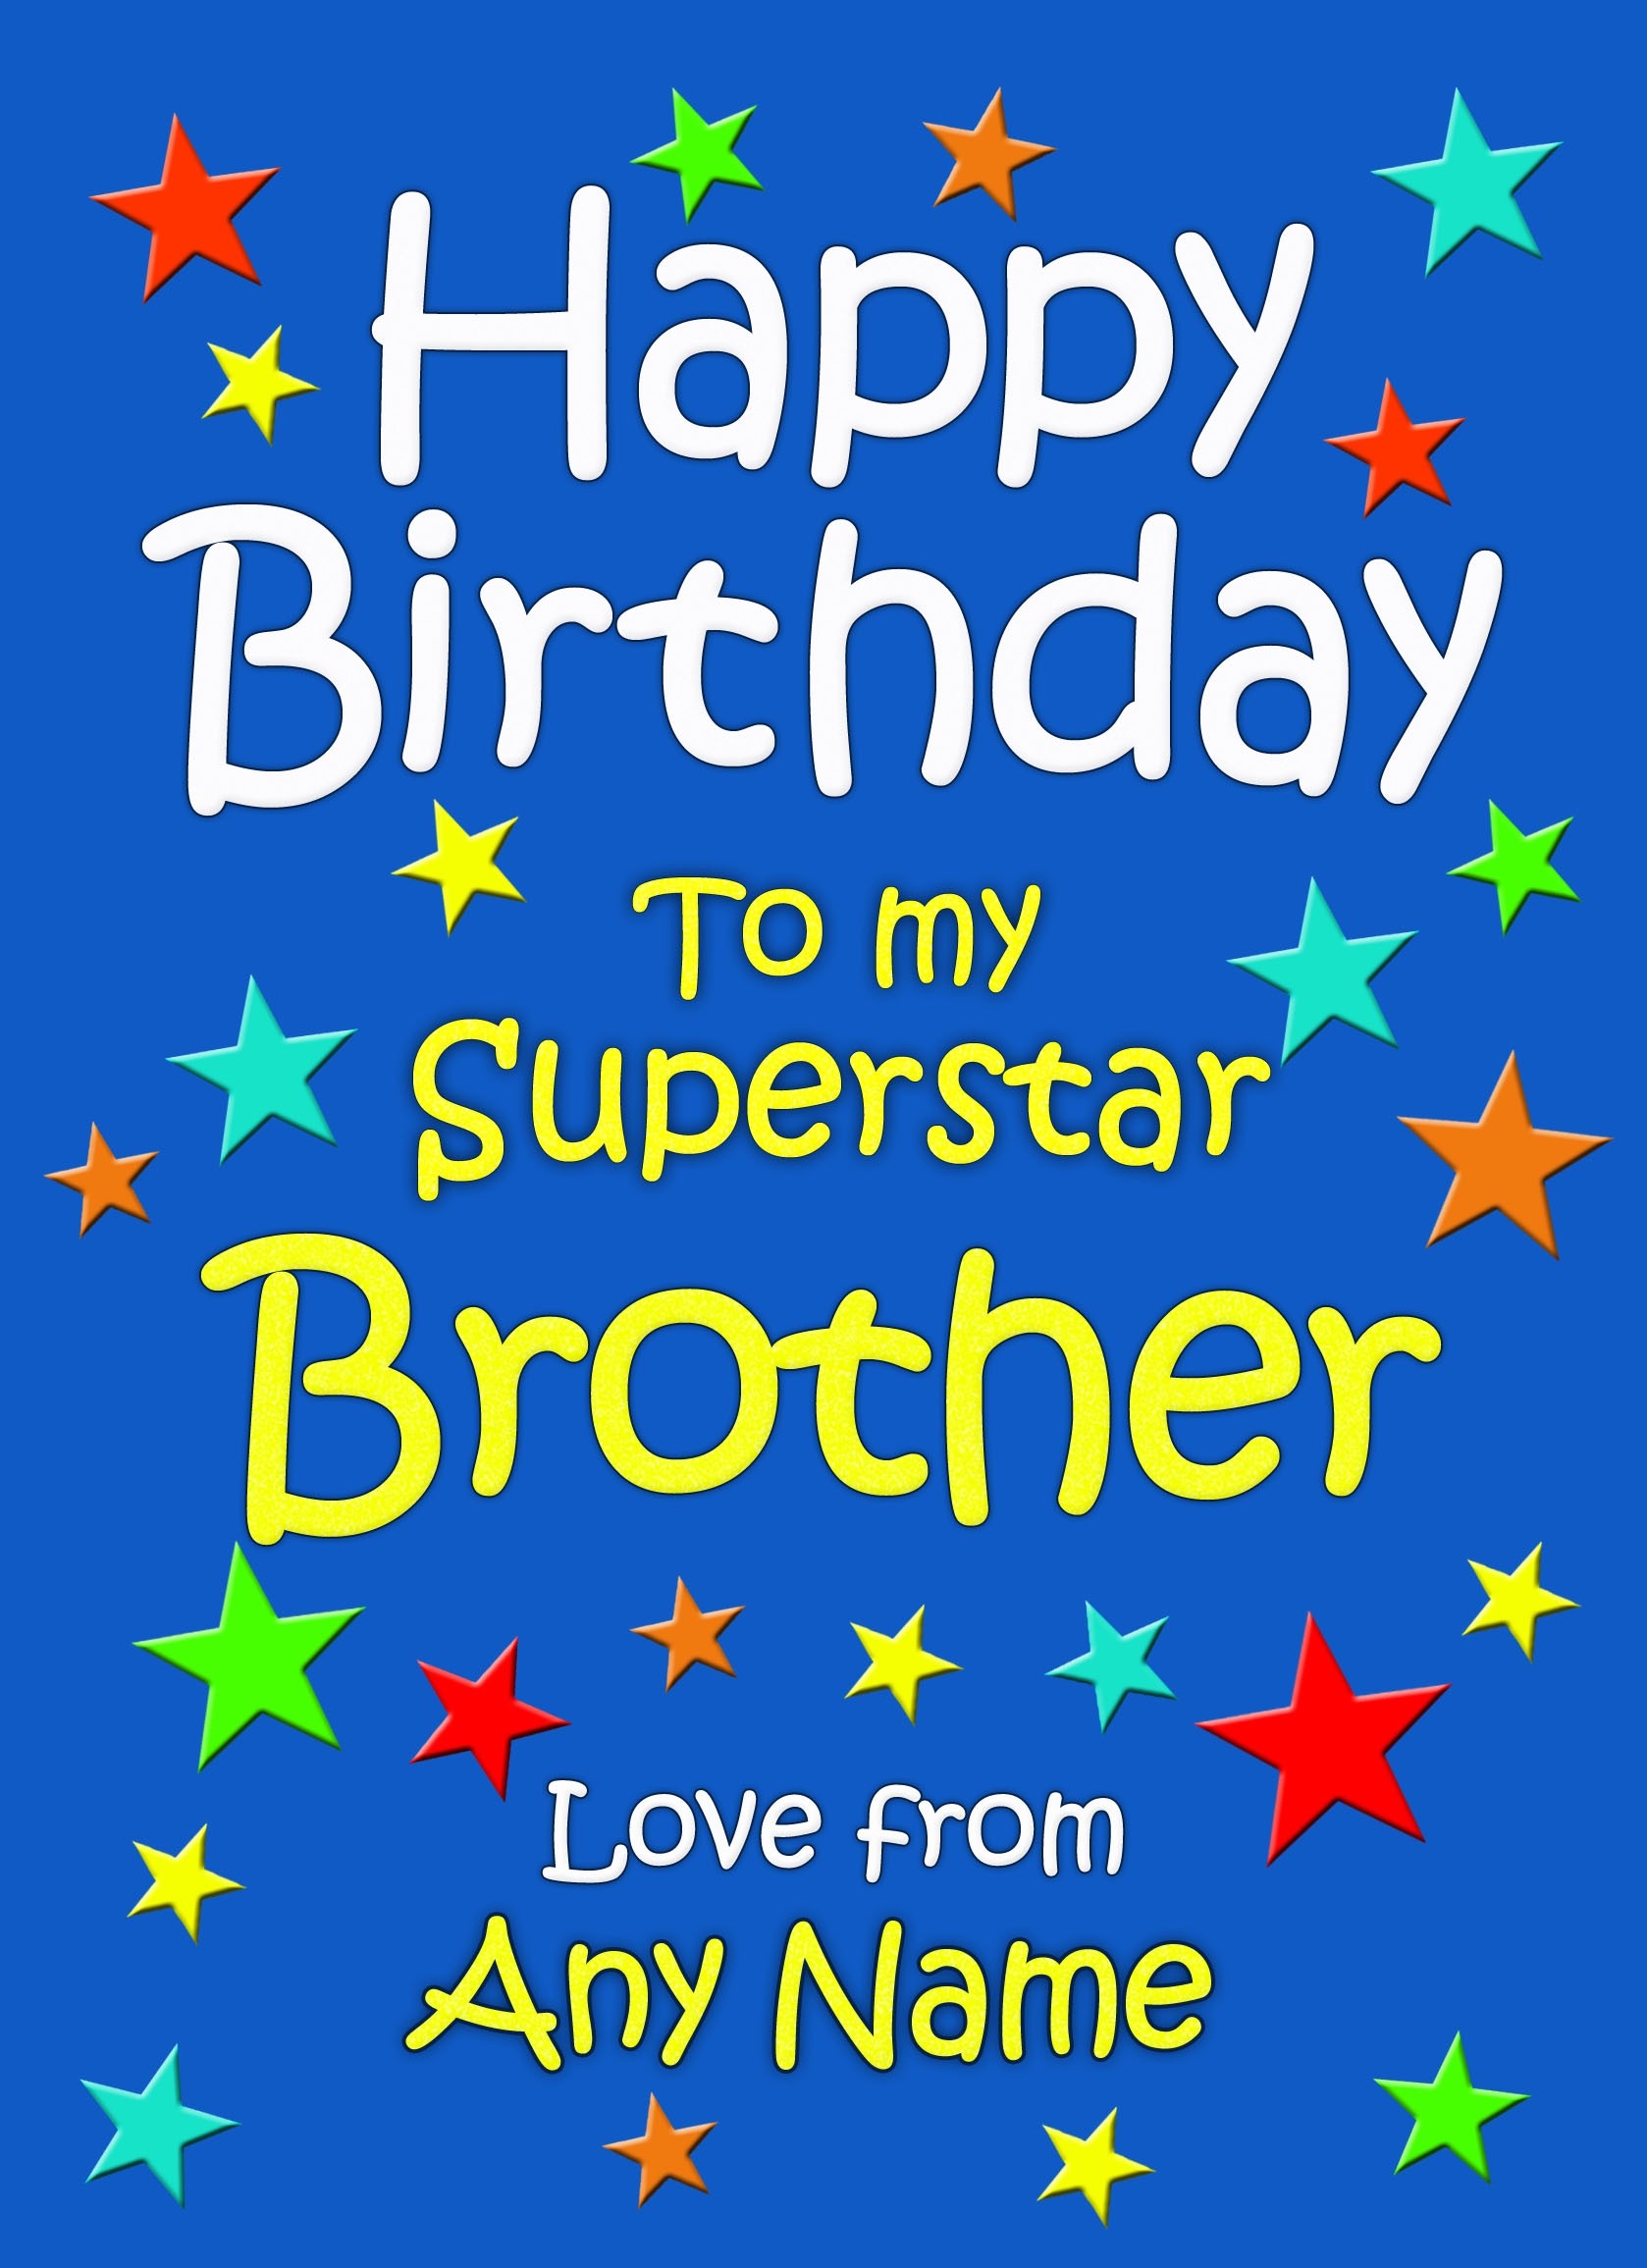 Personalised Brother Birthday Card (Blue)